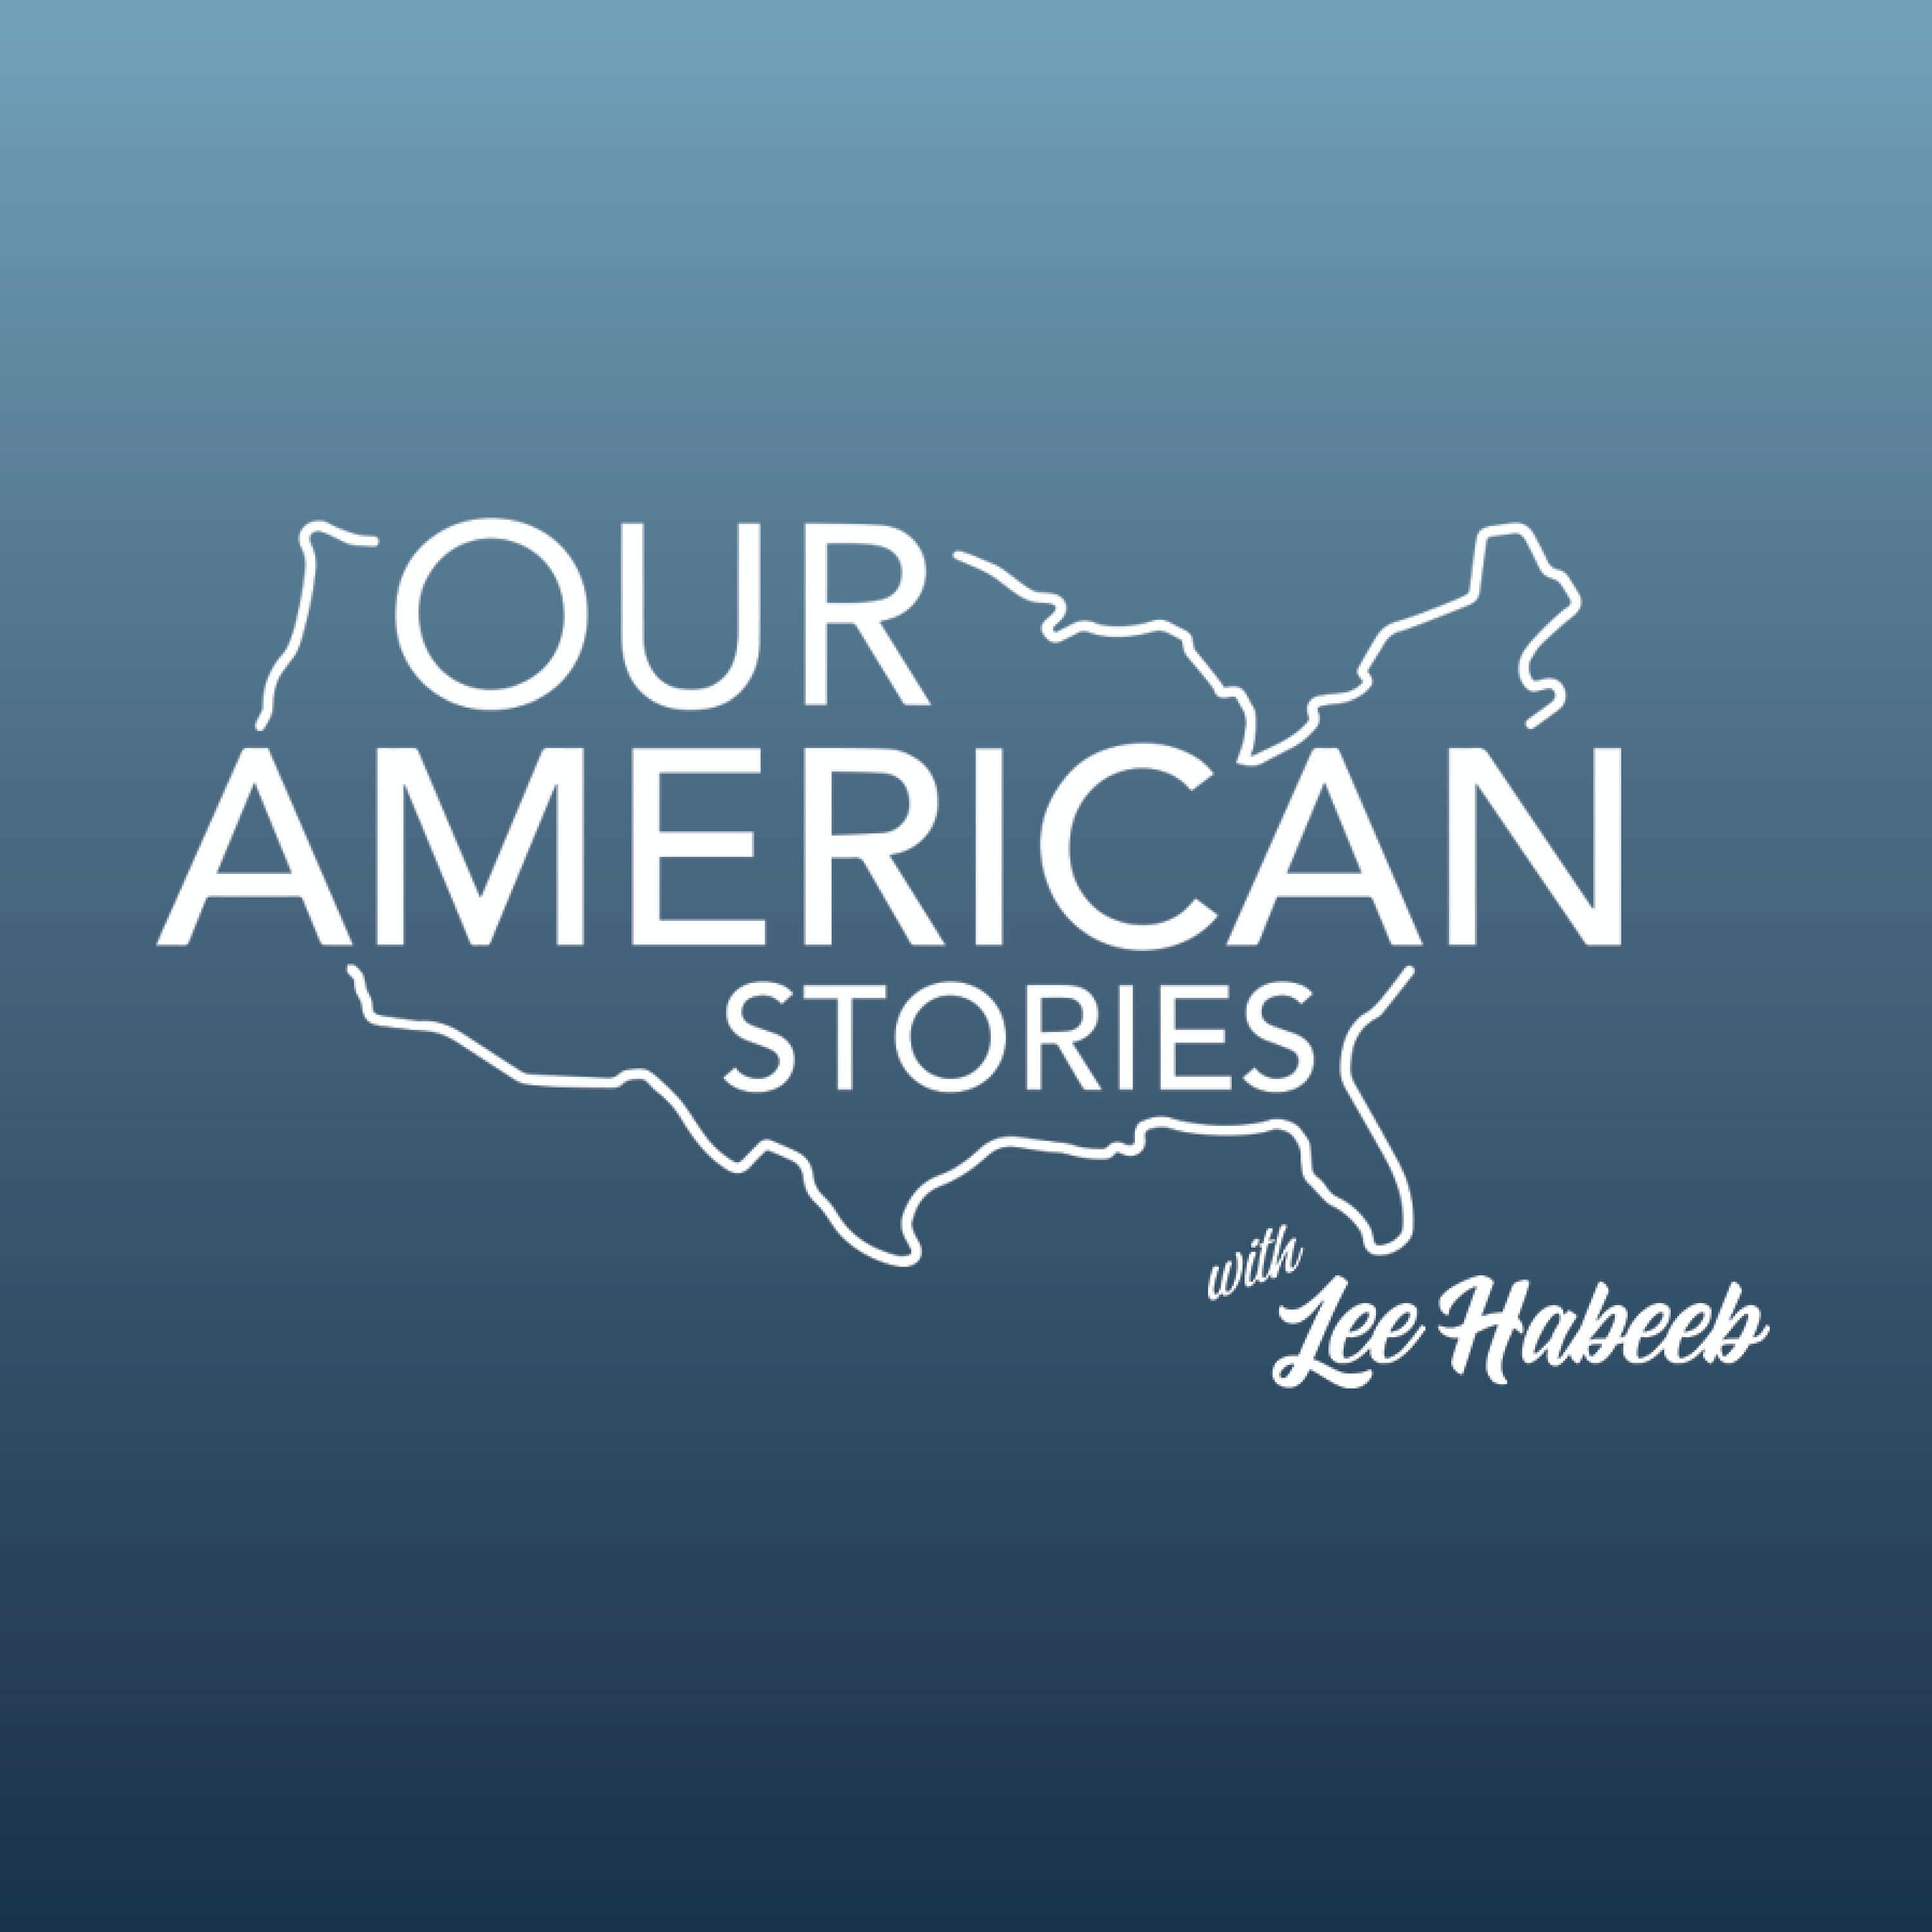 Our American Stories